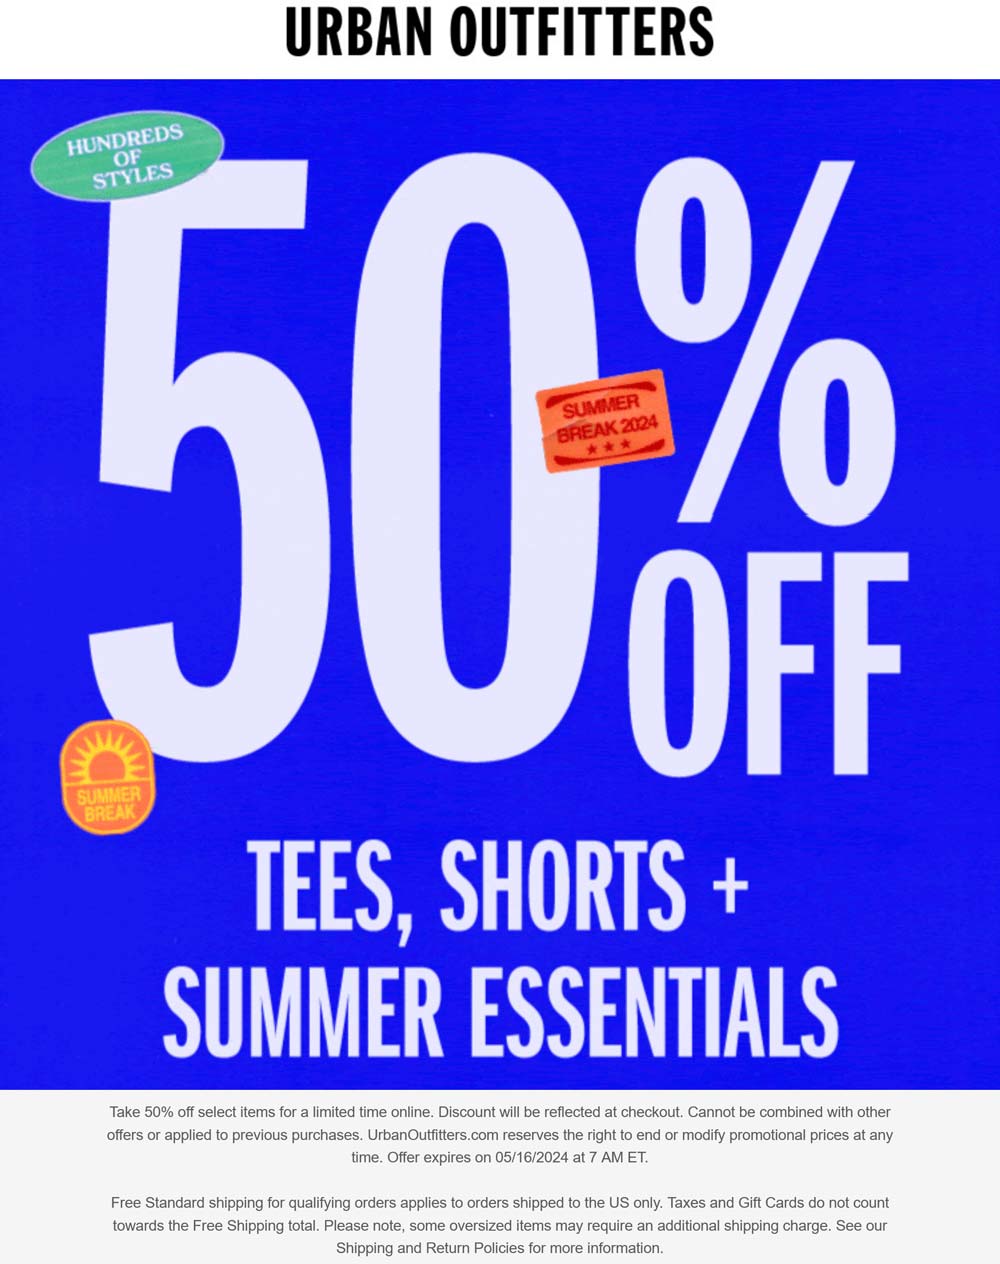 Urban Outfitters stores Coupon  50% off tees, shorts & summer essentials online at Urban Outfitters #urbanoutfitters 